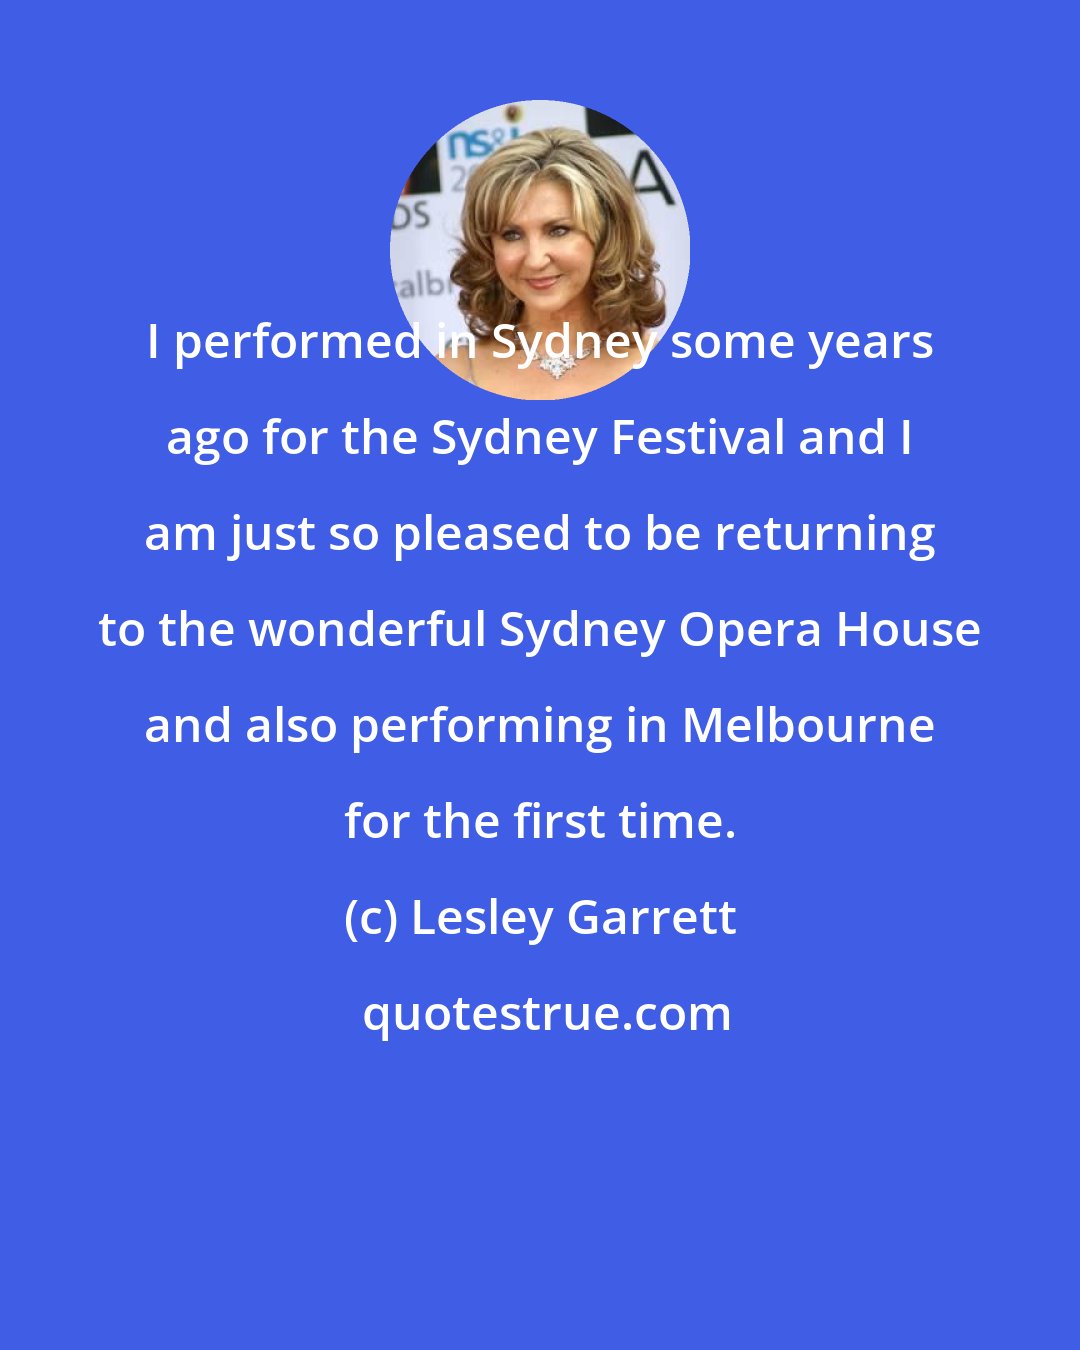 Lesley Garrett: I performed in Sydney some years ago for the Sydney Festival and I am just so pleased to be returning to the wonderful Sydney Opera House and also performing in Melbourne for the first time.